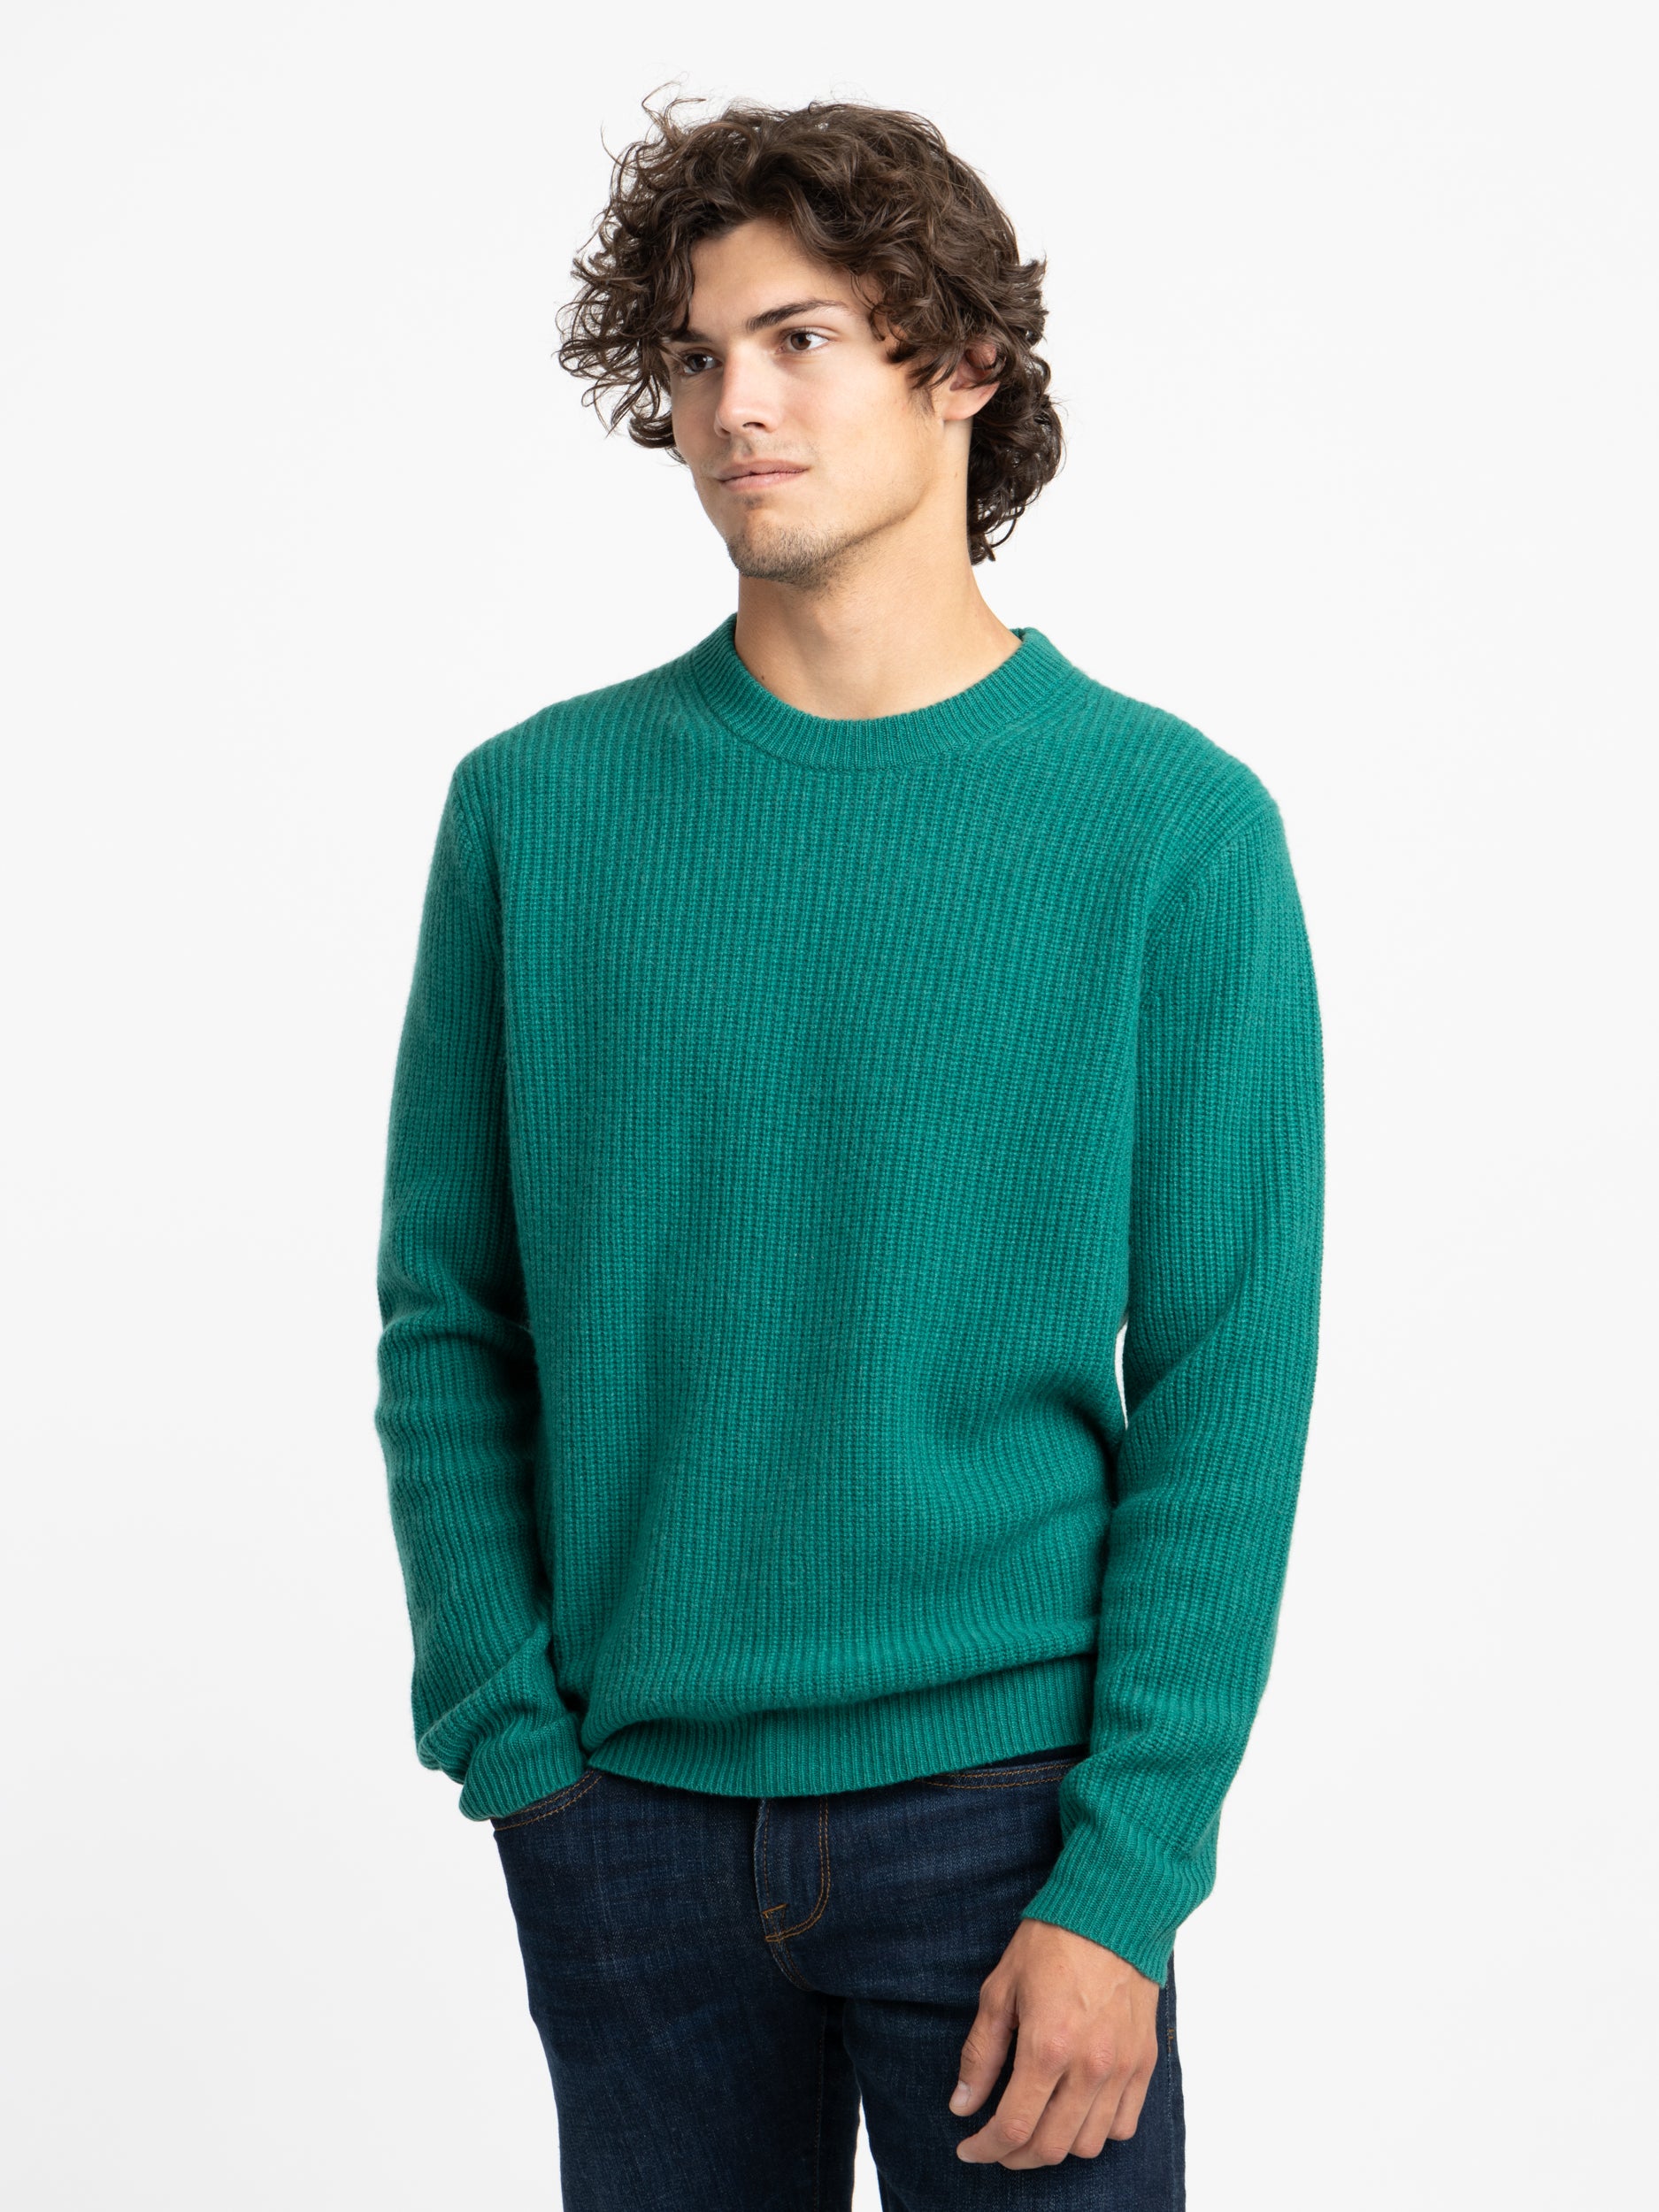 Jordan Ribbed Brushed Cashmere Sweater – The Helm Clothing